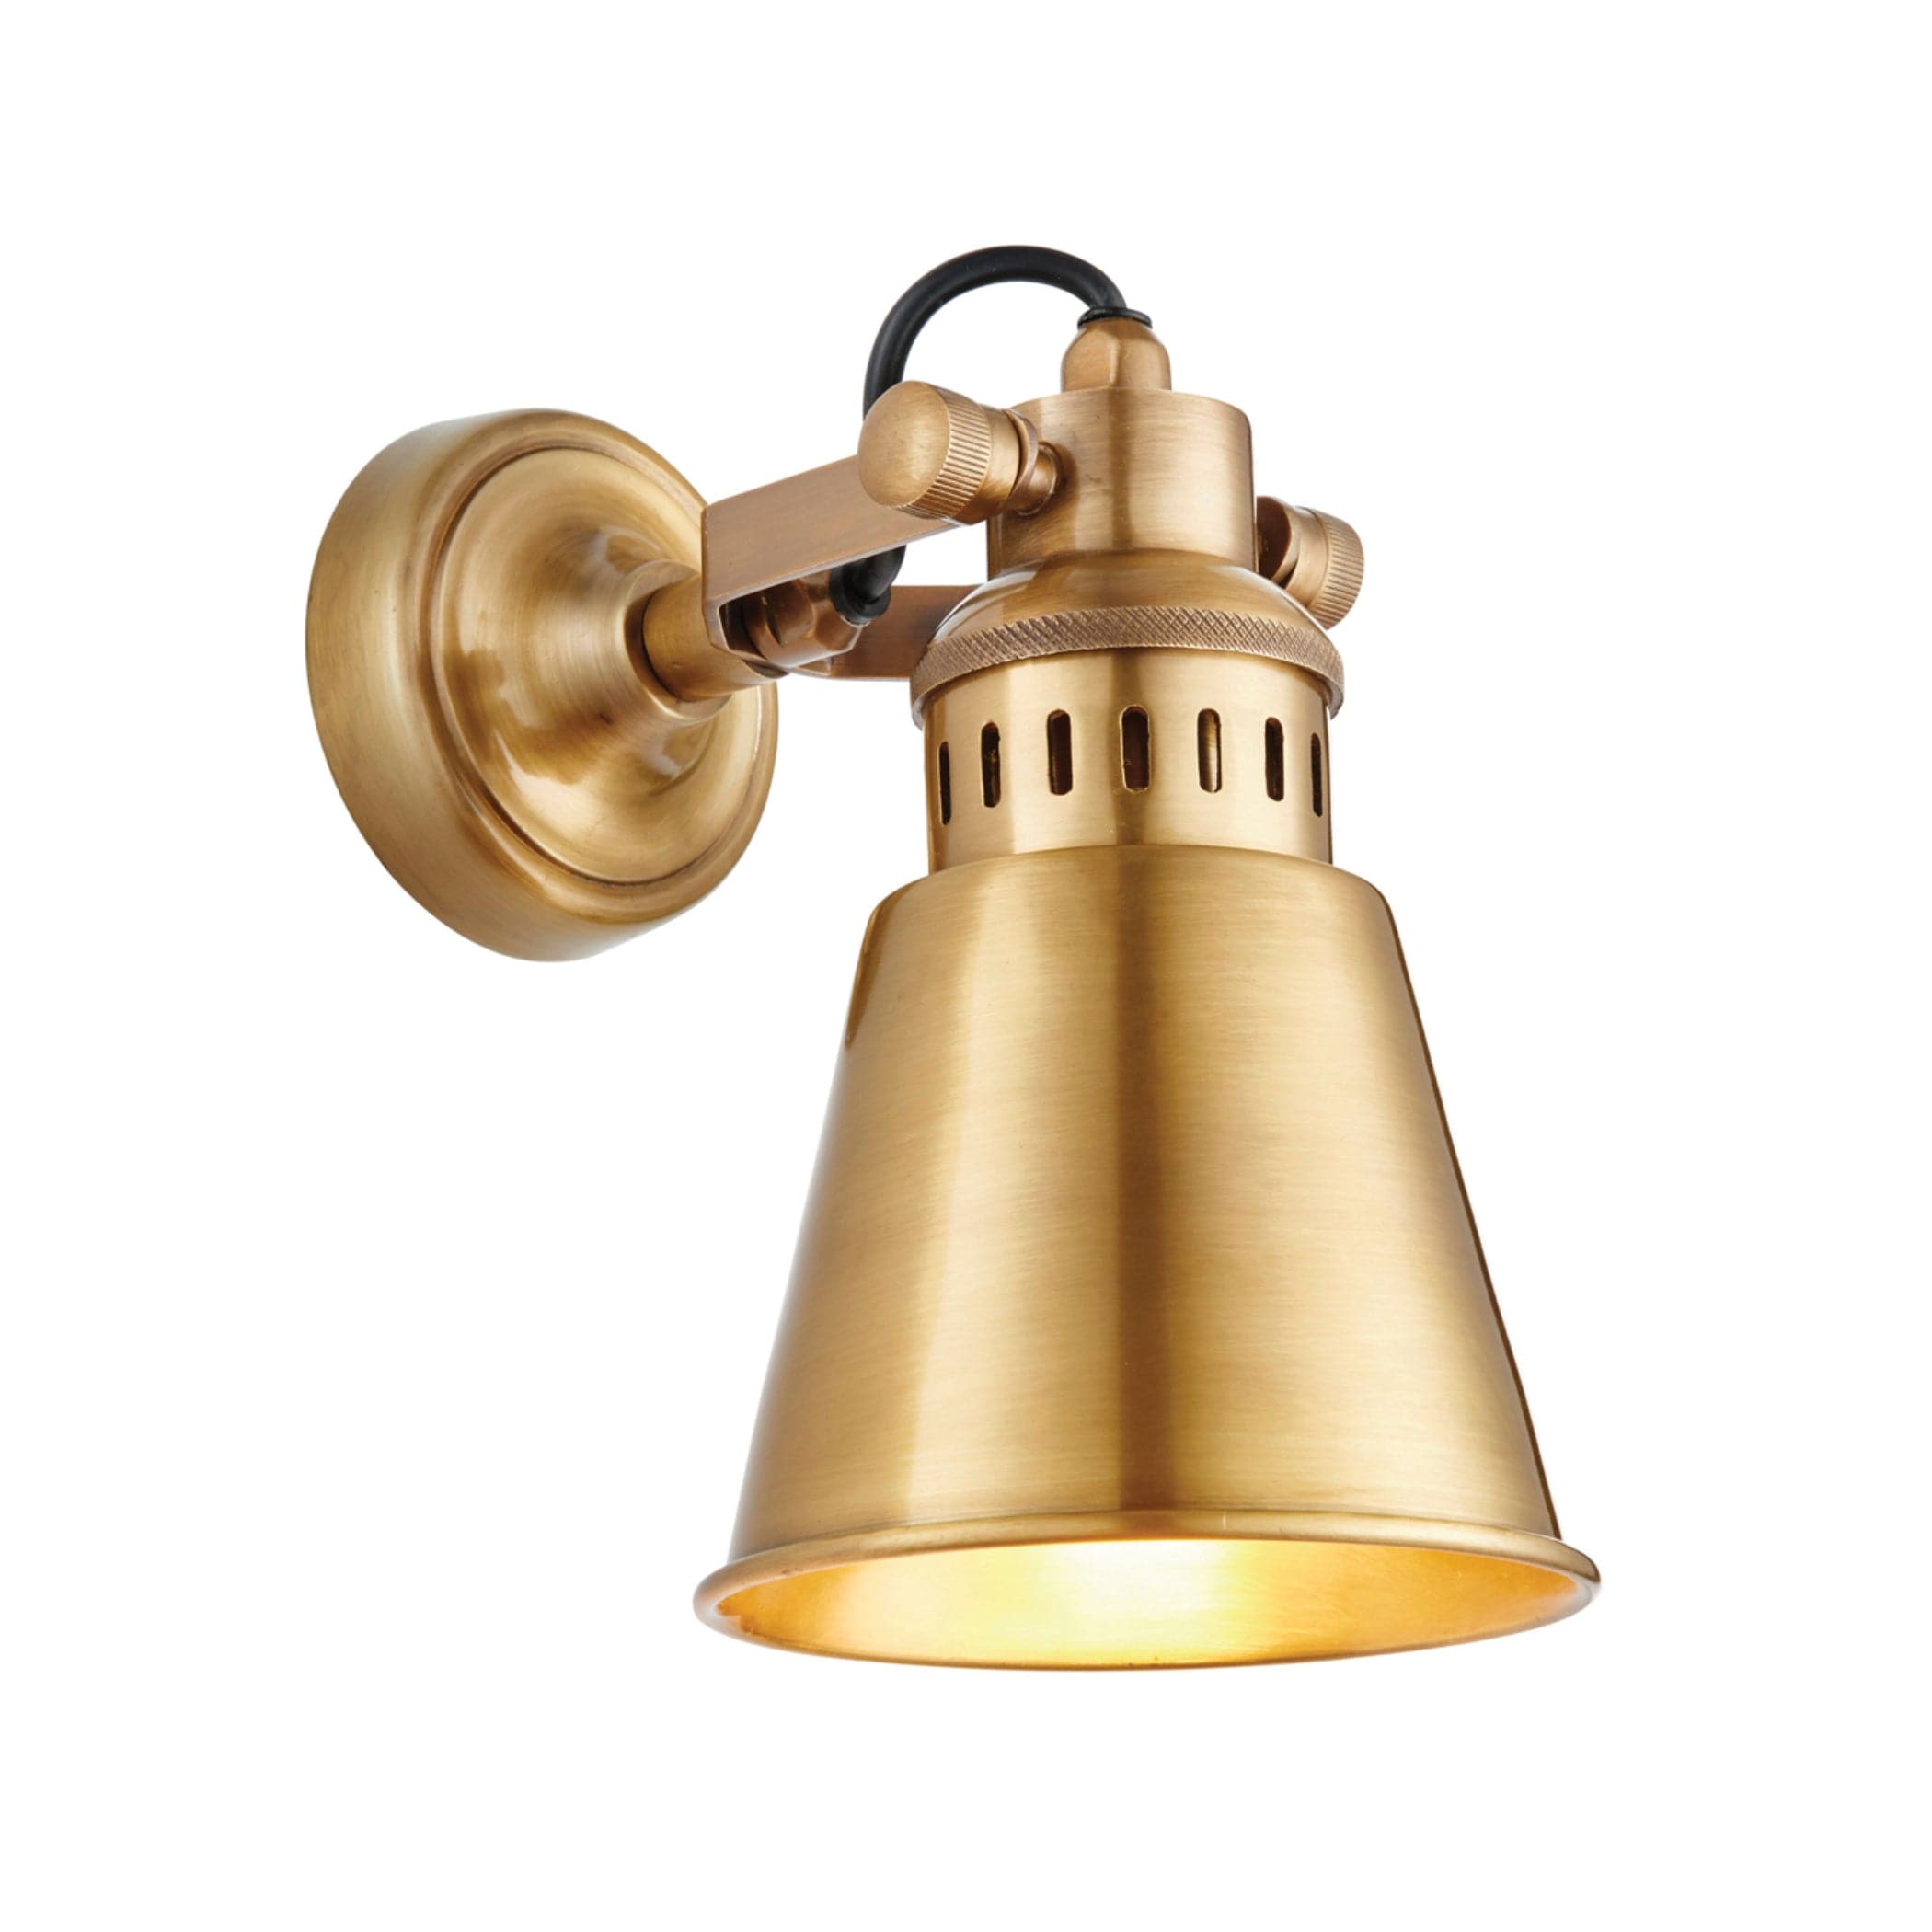 Antiqued Brass vintage style Wall Light 1